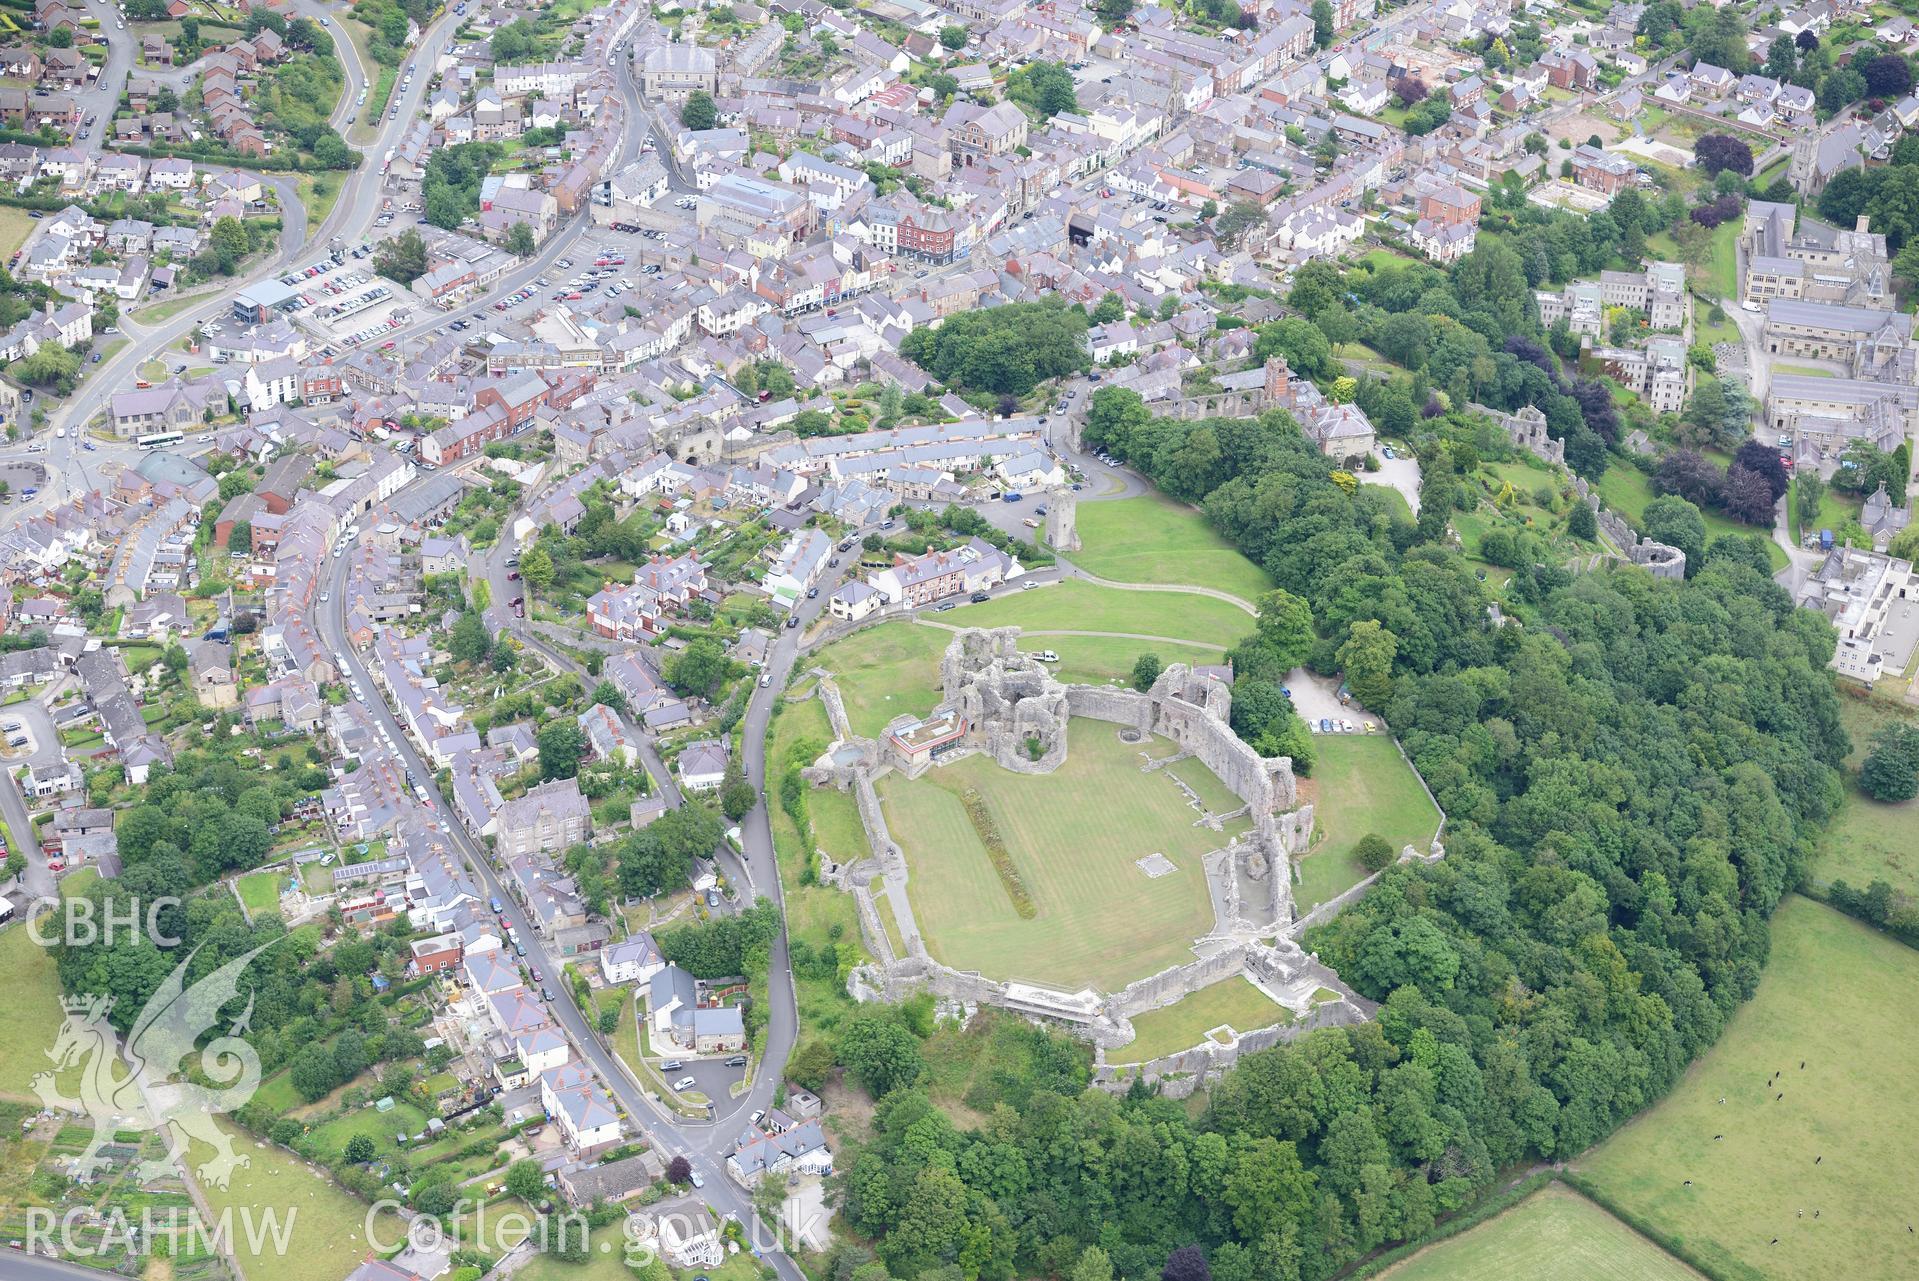 Town walls, Denbigh Castle, Castle House, CADW visitor centre, the Goblin Tower and Howell's School. Oblique aerial photograph taken during the Royal Commission's programme of archaeological aerial reconnaissance by Toby Driver on 30th July 2015.